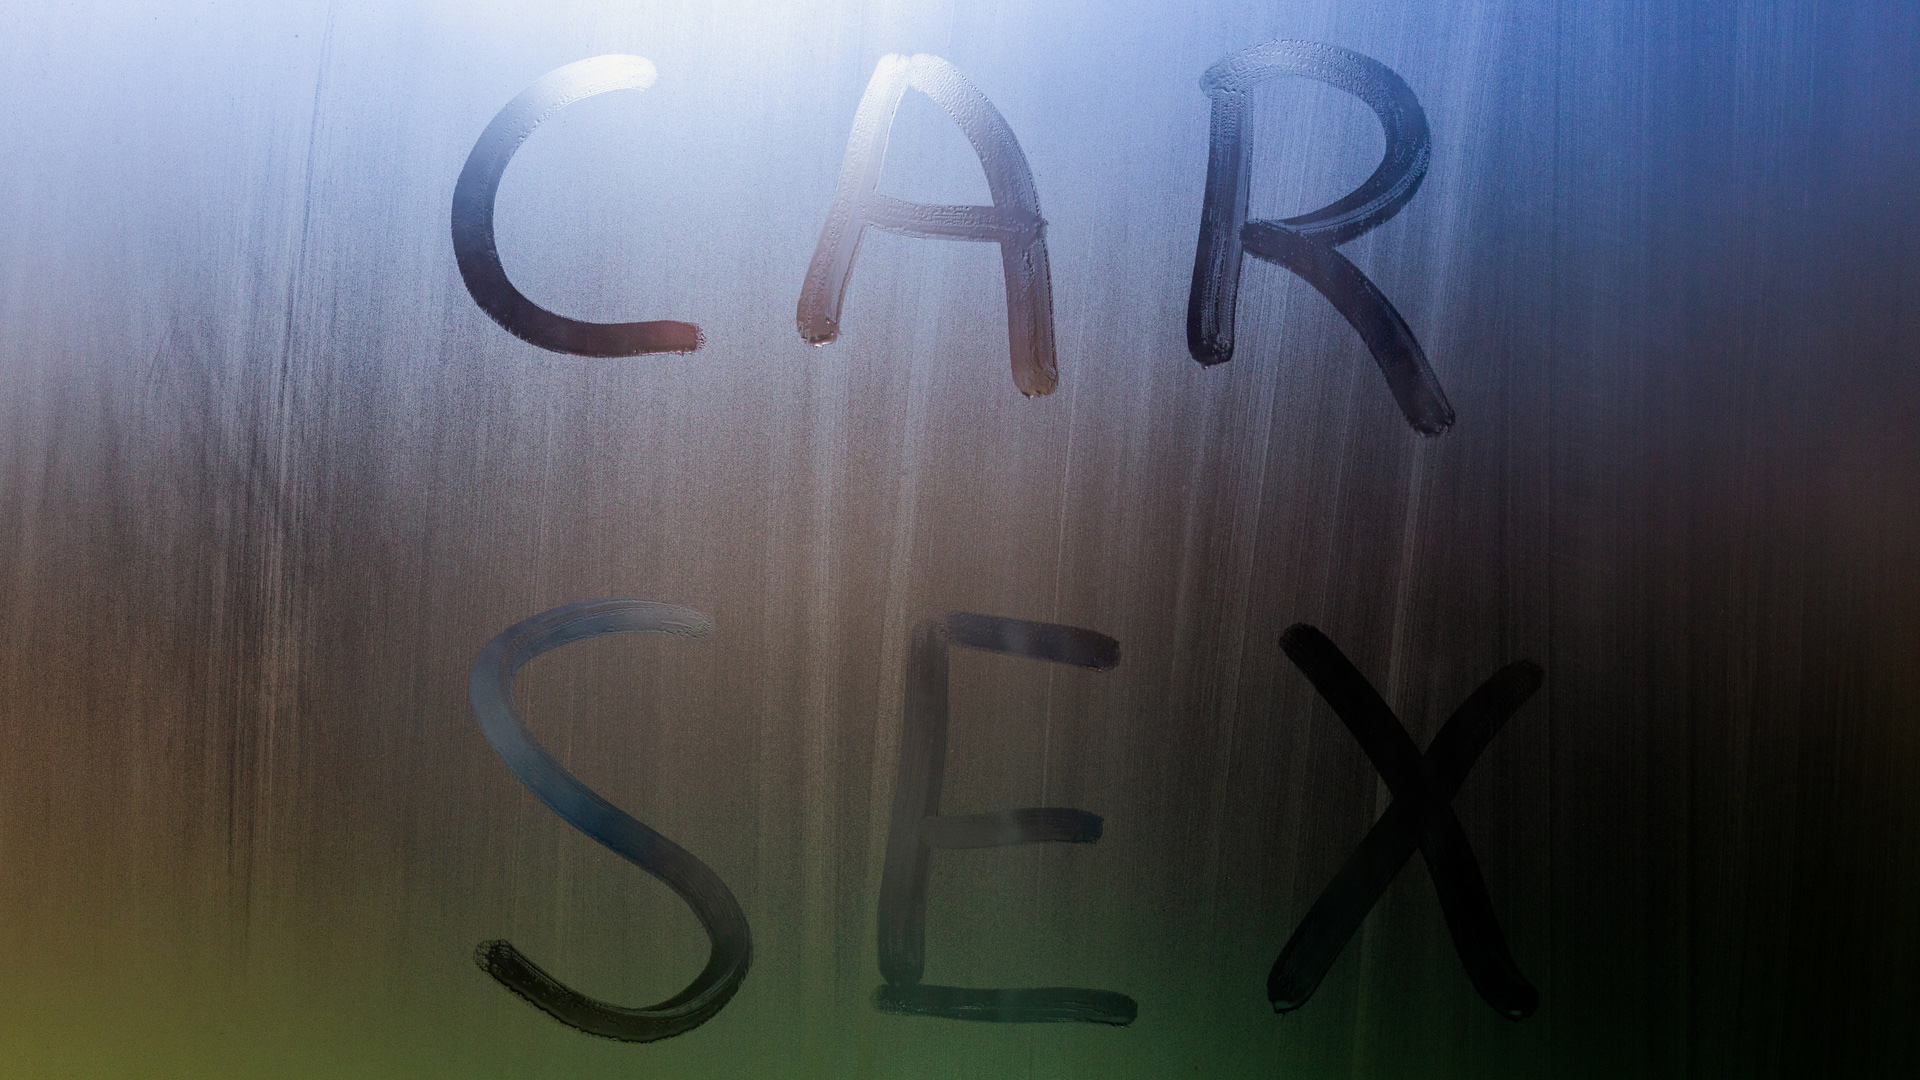 Foggy window with the words "car sex" written on it.